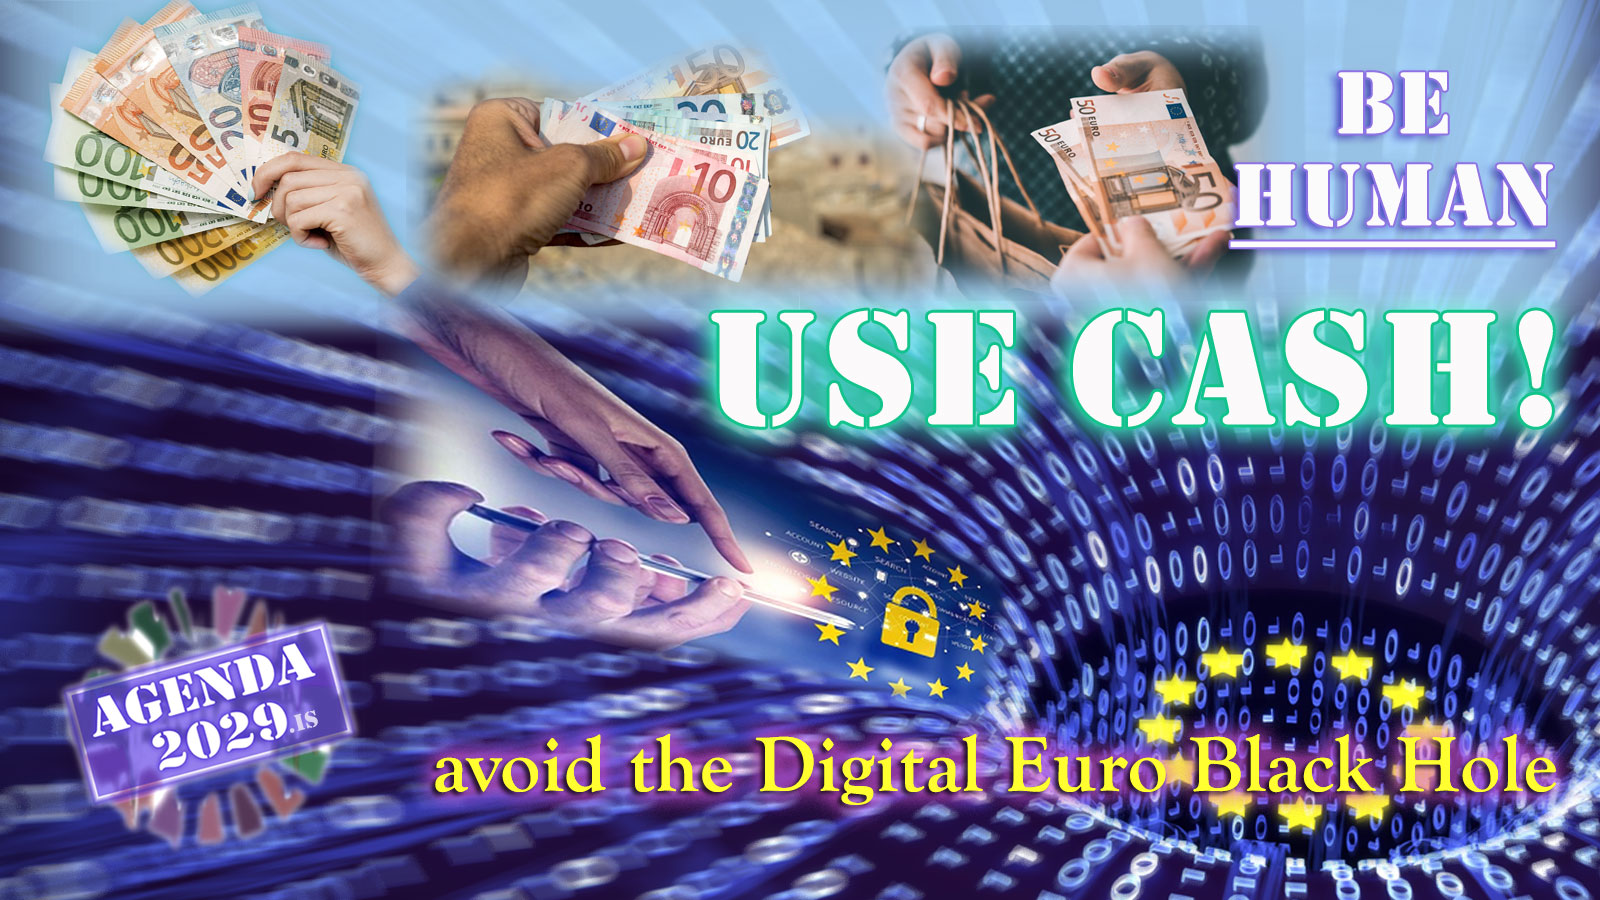 Read more about the article Be Human, Use Cash! Avoid the Digital Euro Black Hole.